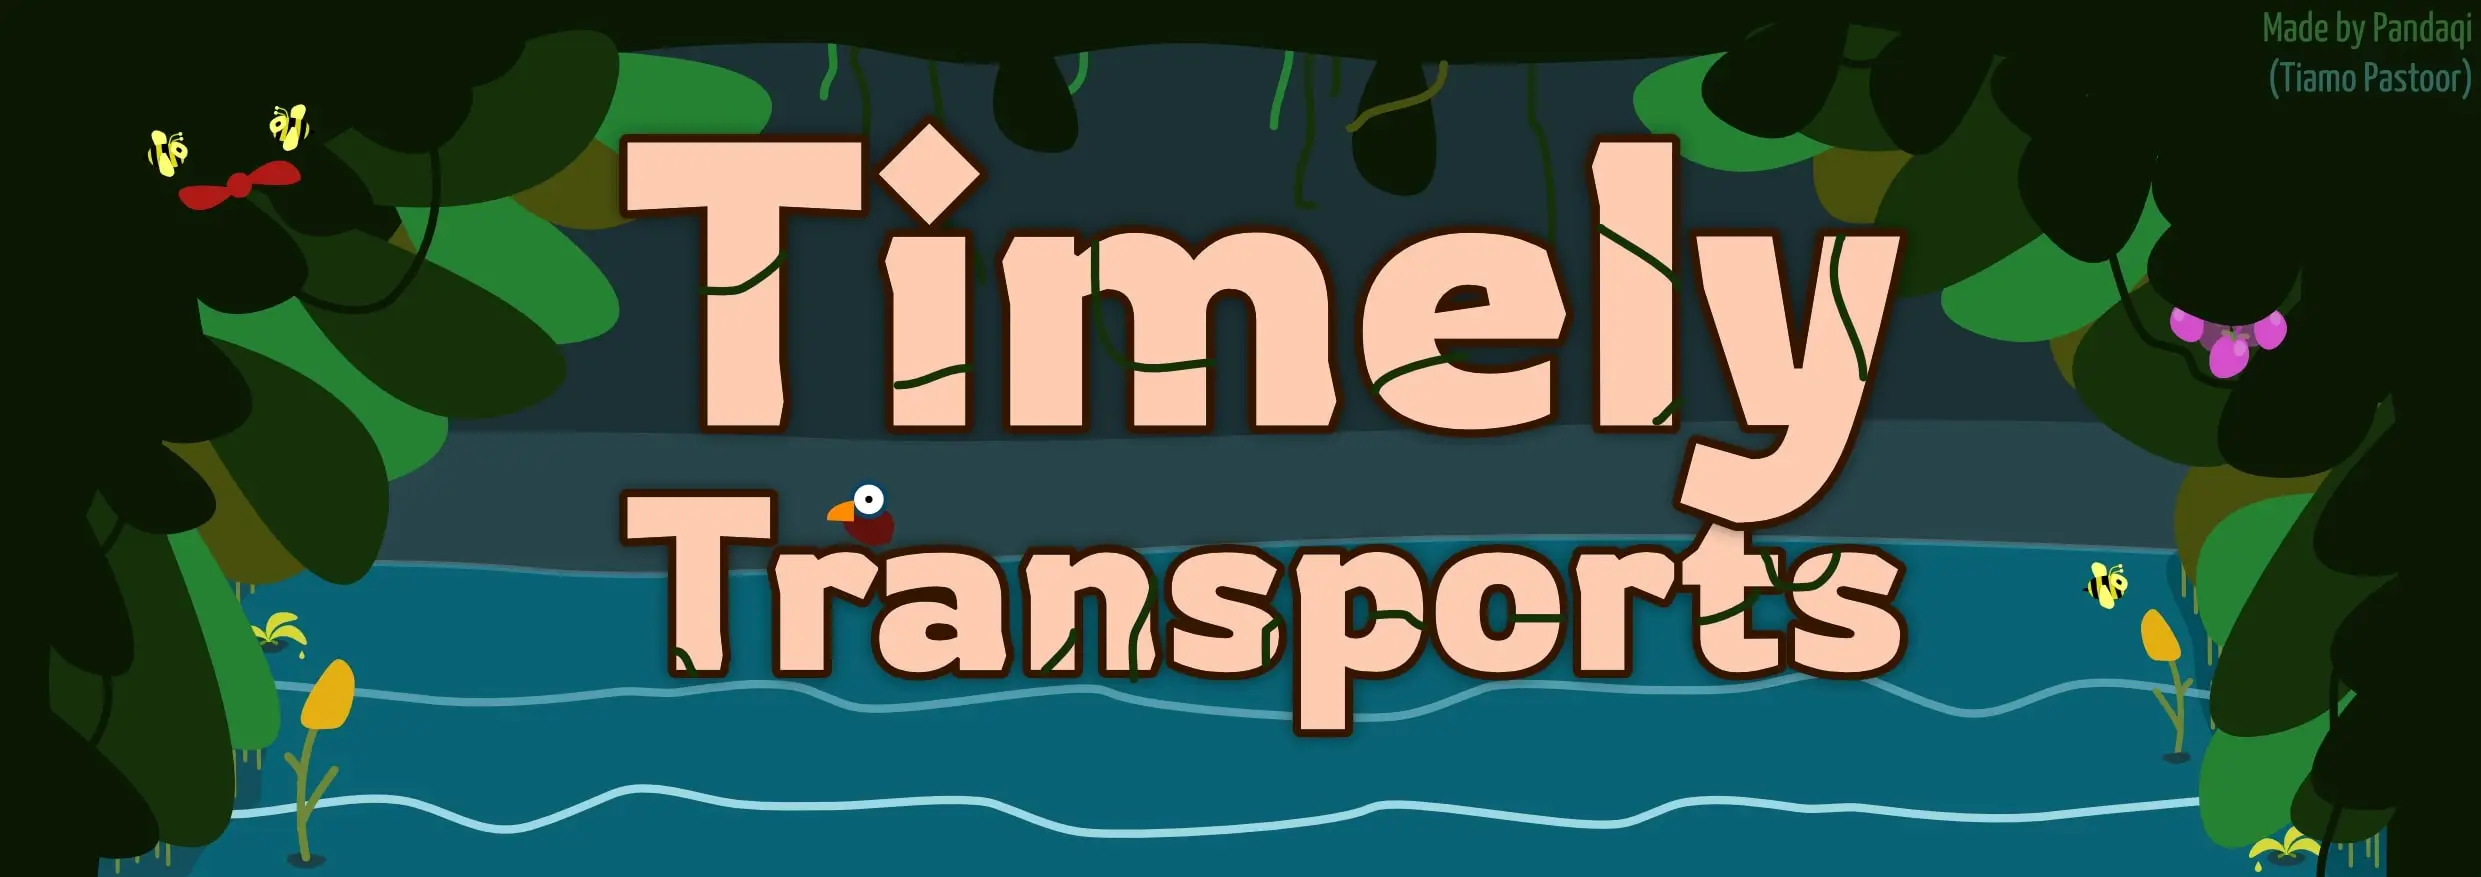 Thumbnail / Header for article: Timely Transports: v2 Update